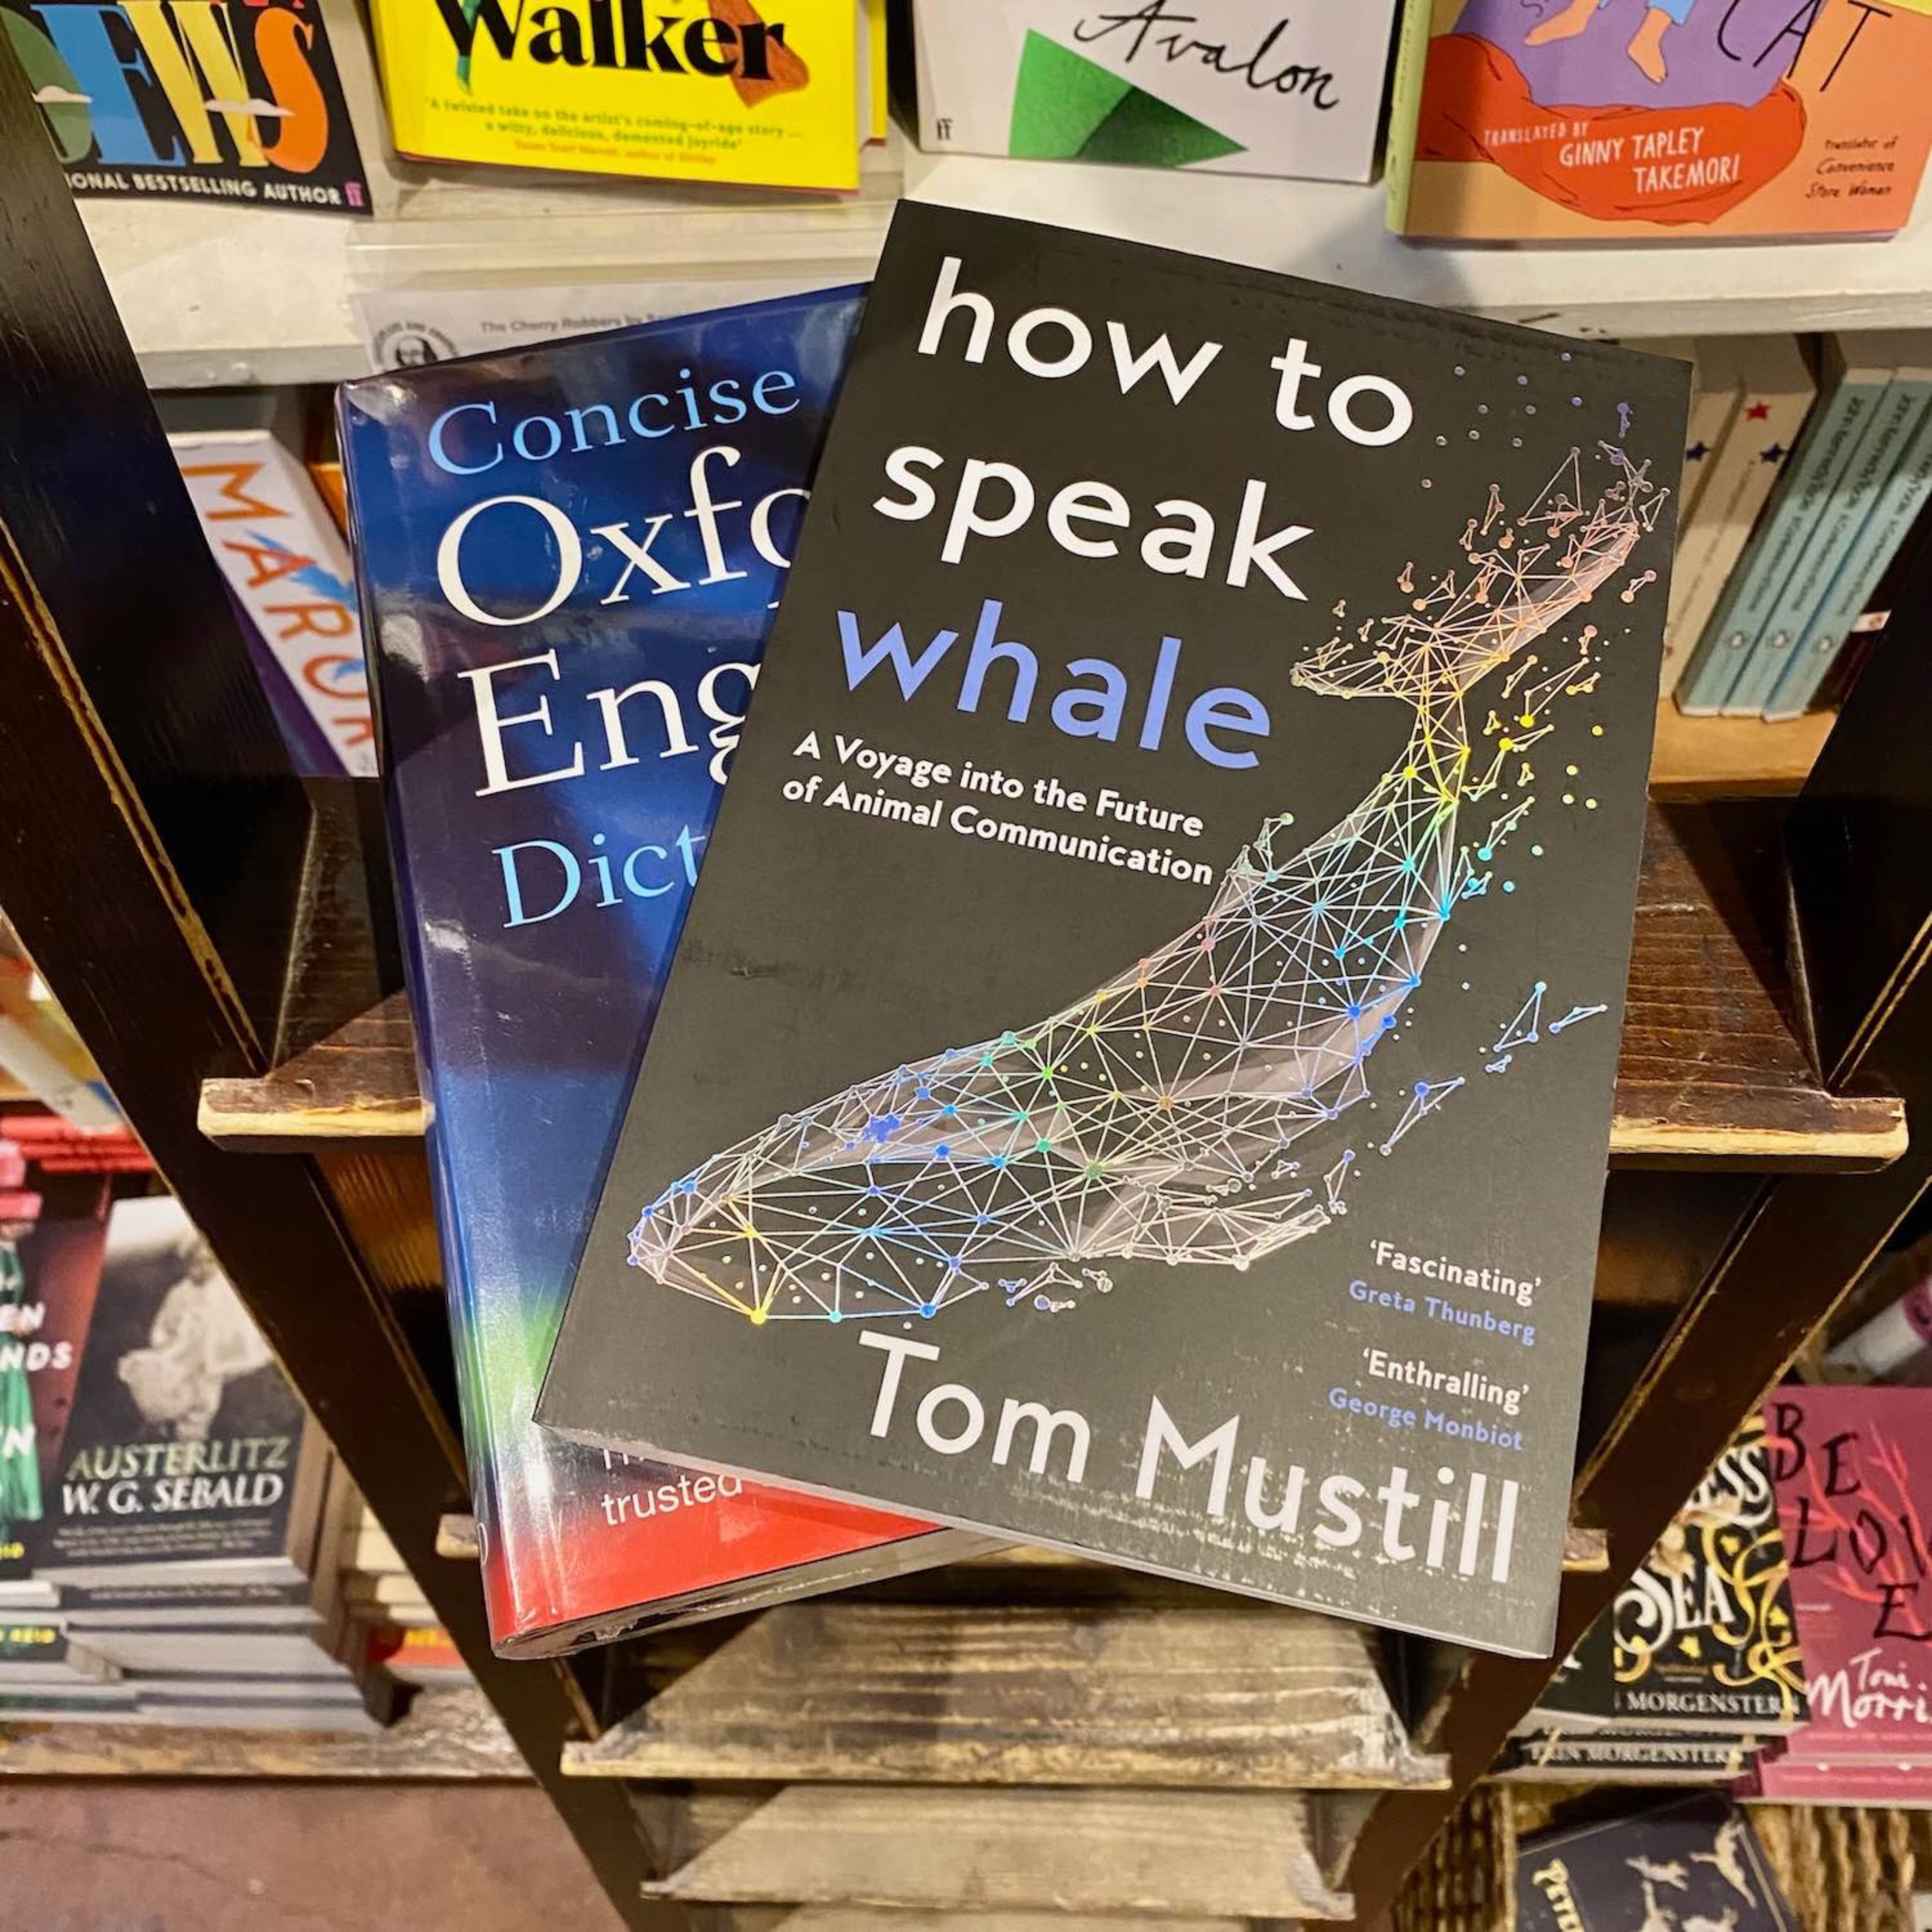 🐋How to Speak to Whales (and other animals…) with Tom Mustill🐋